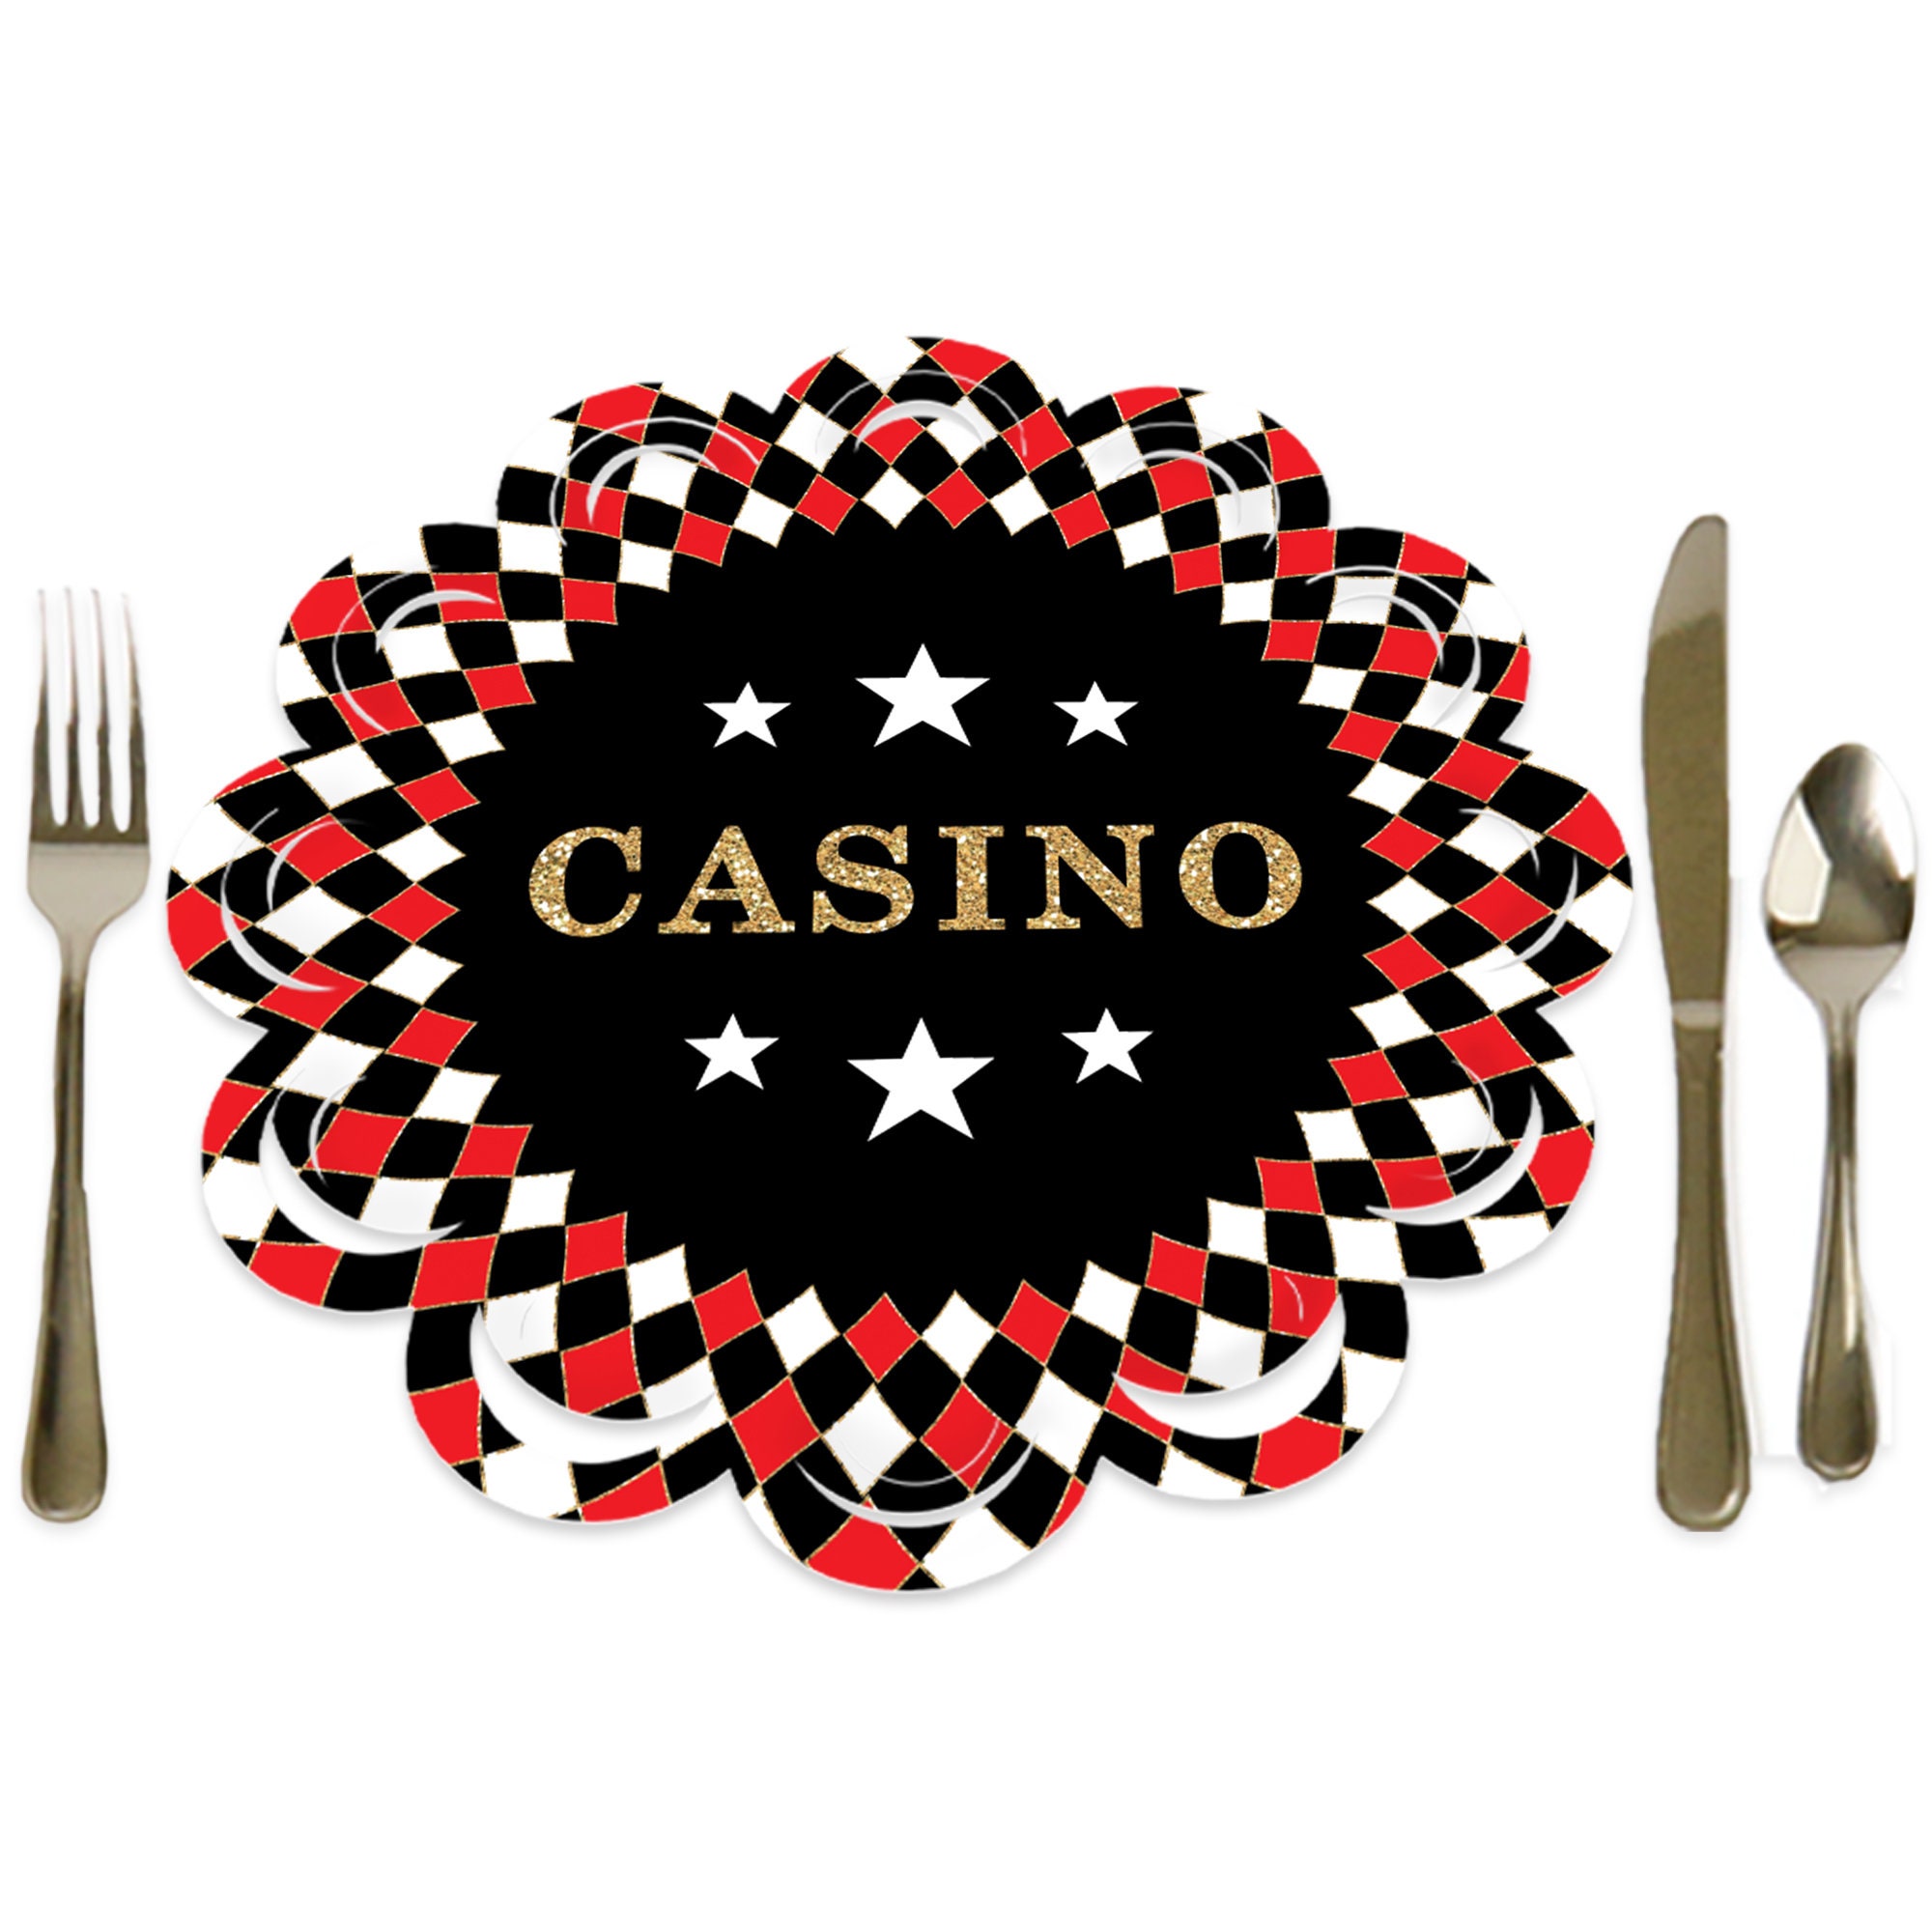 New 2 Pieces Casino Theme Party Decorations Poker Tablecloth Las Vegas Tab